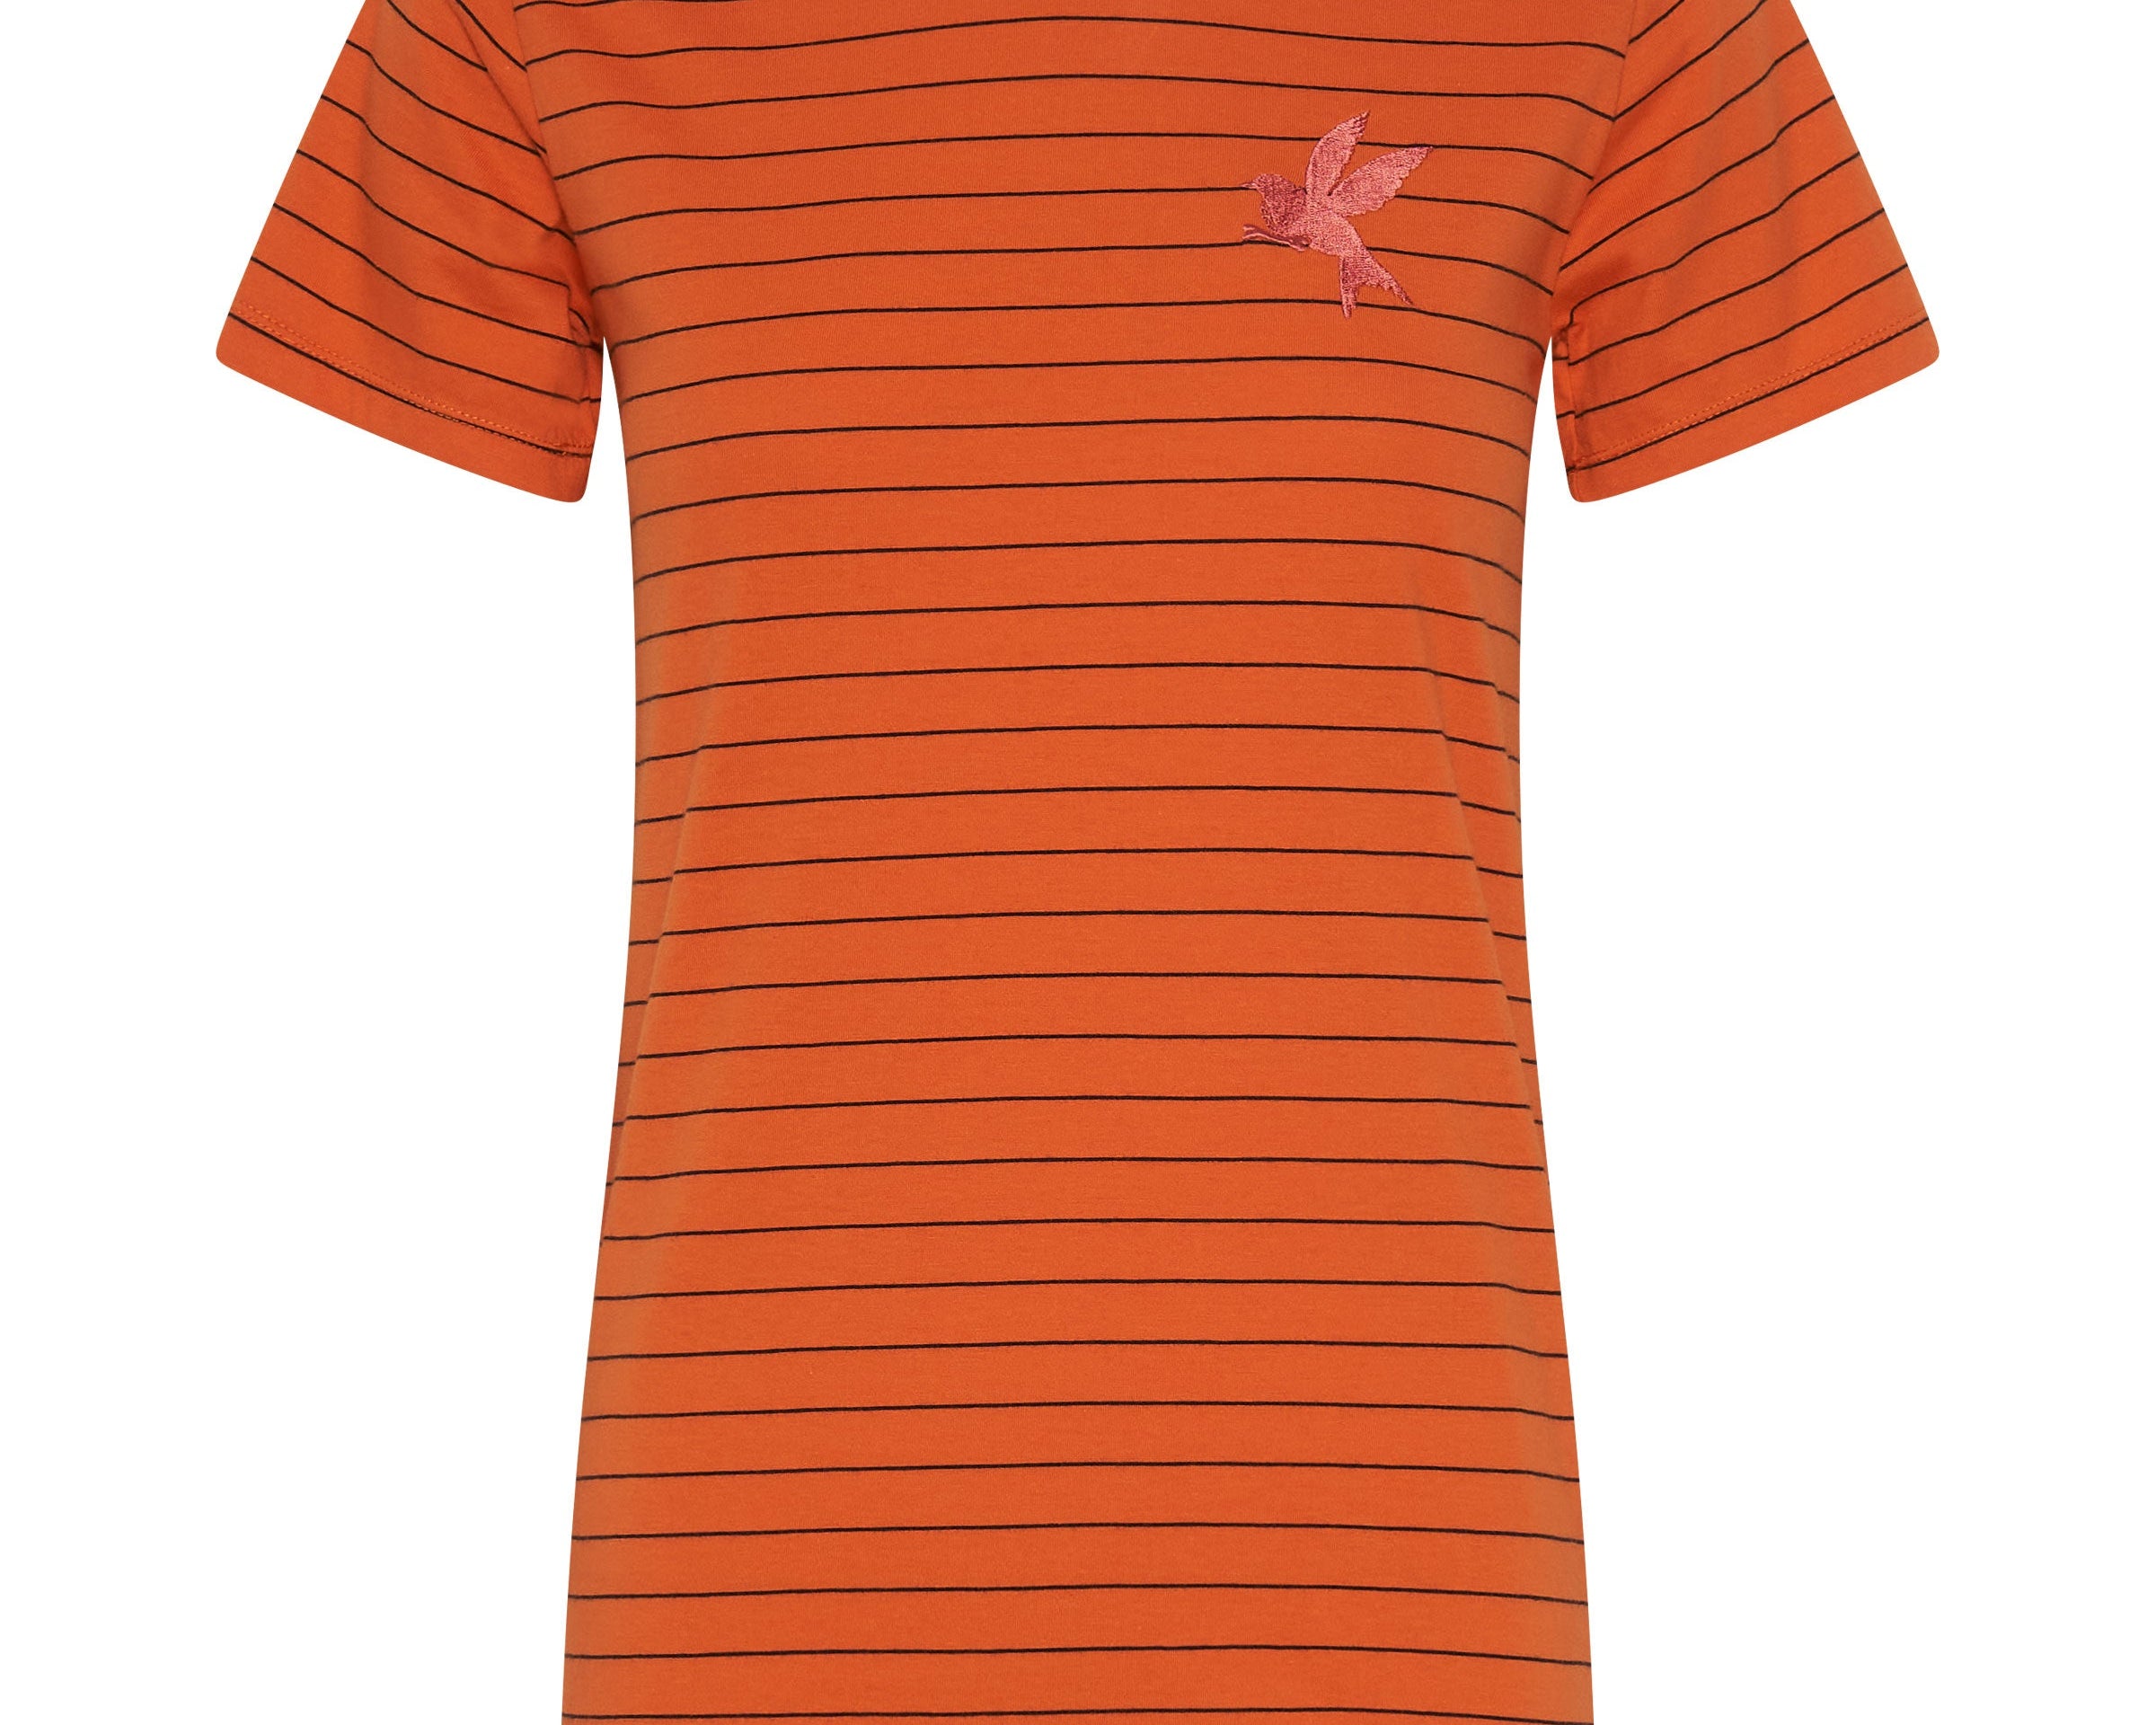 BOWER BIRD EMBROIDERED LOGO FITTED TEE ORANGE